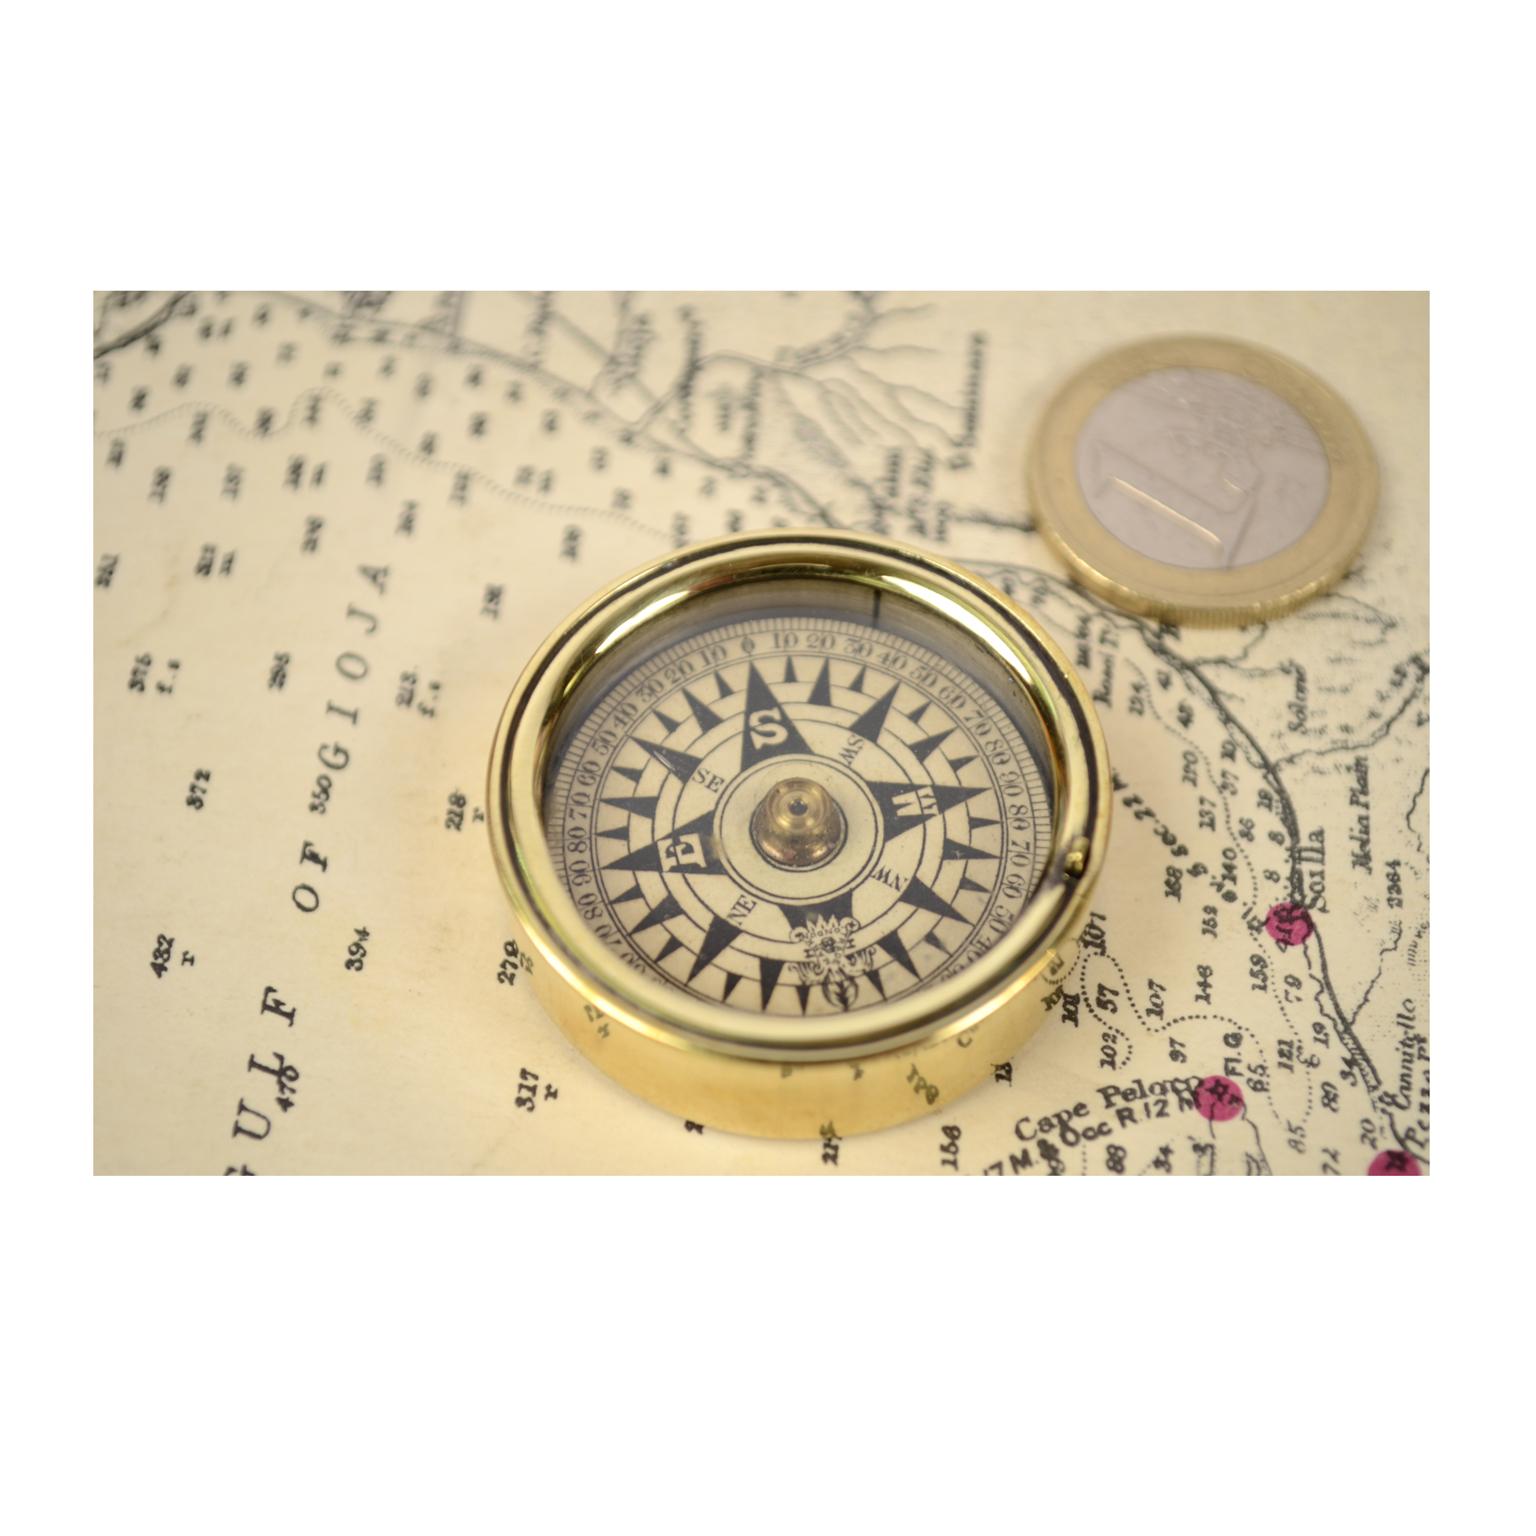 Dry Pocket Nautical Compass Placed in Its Original Box Made of Turned Brass 1